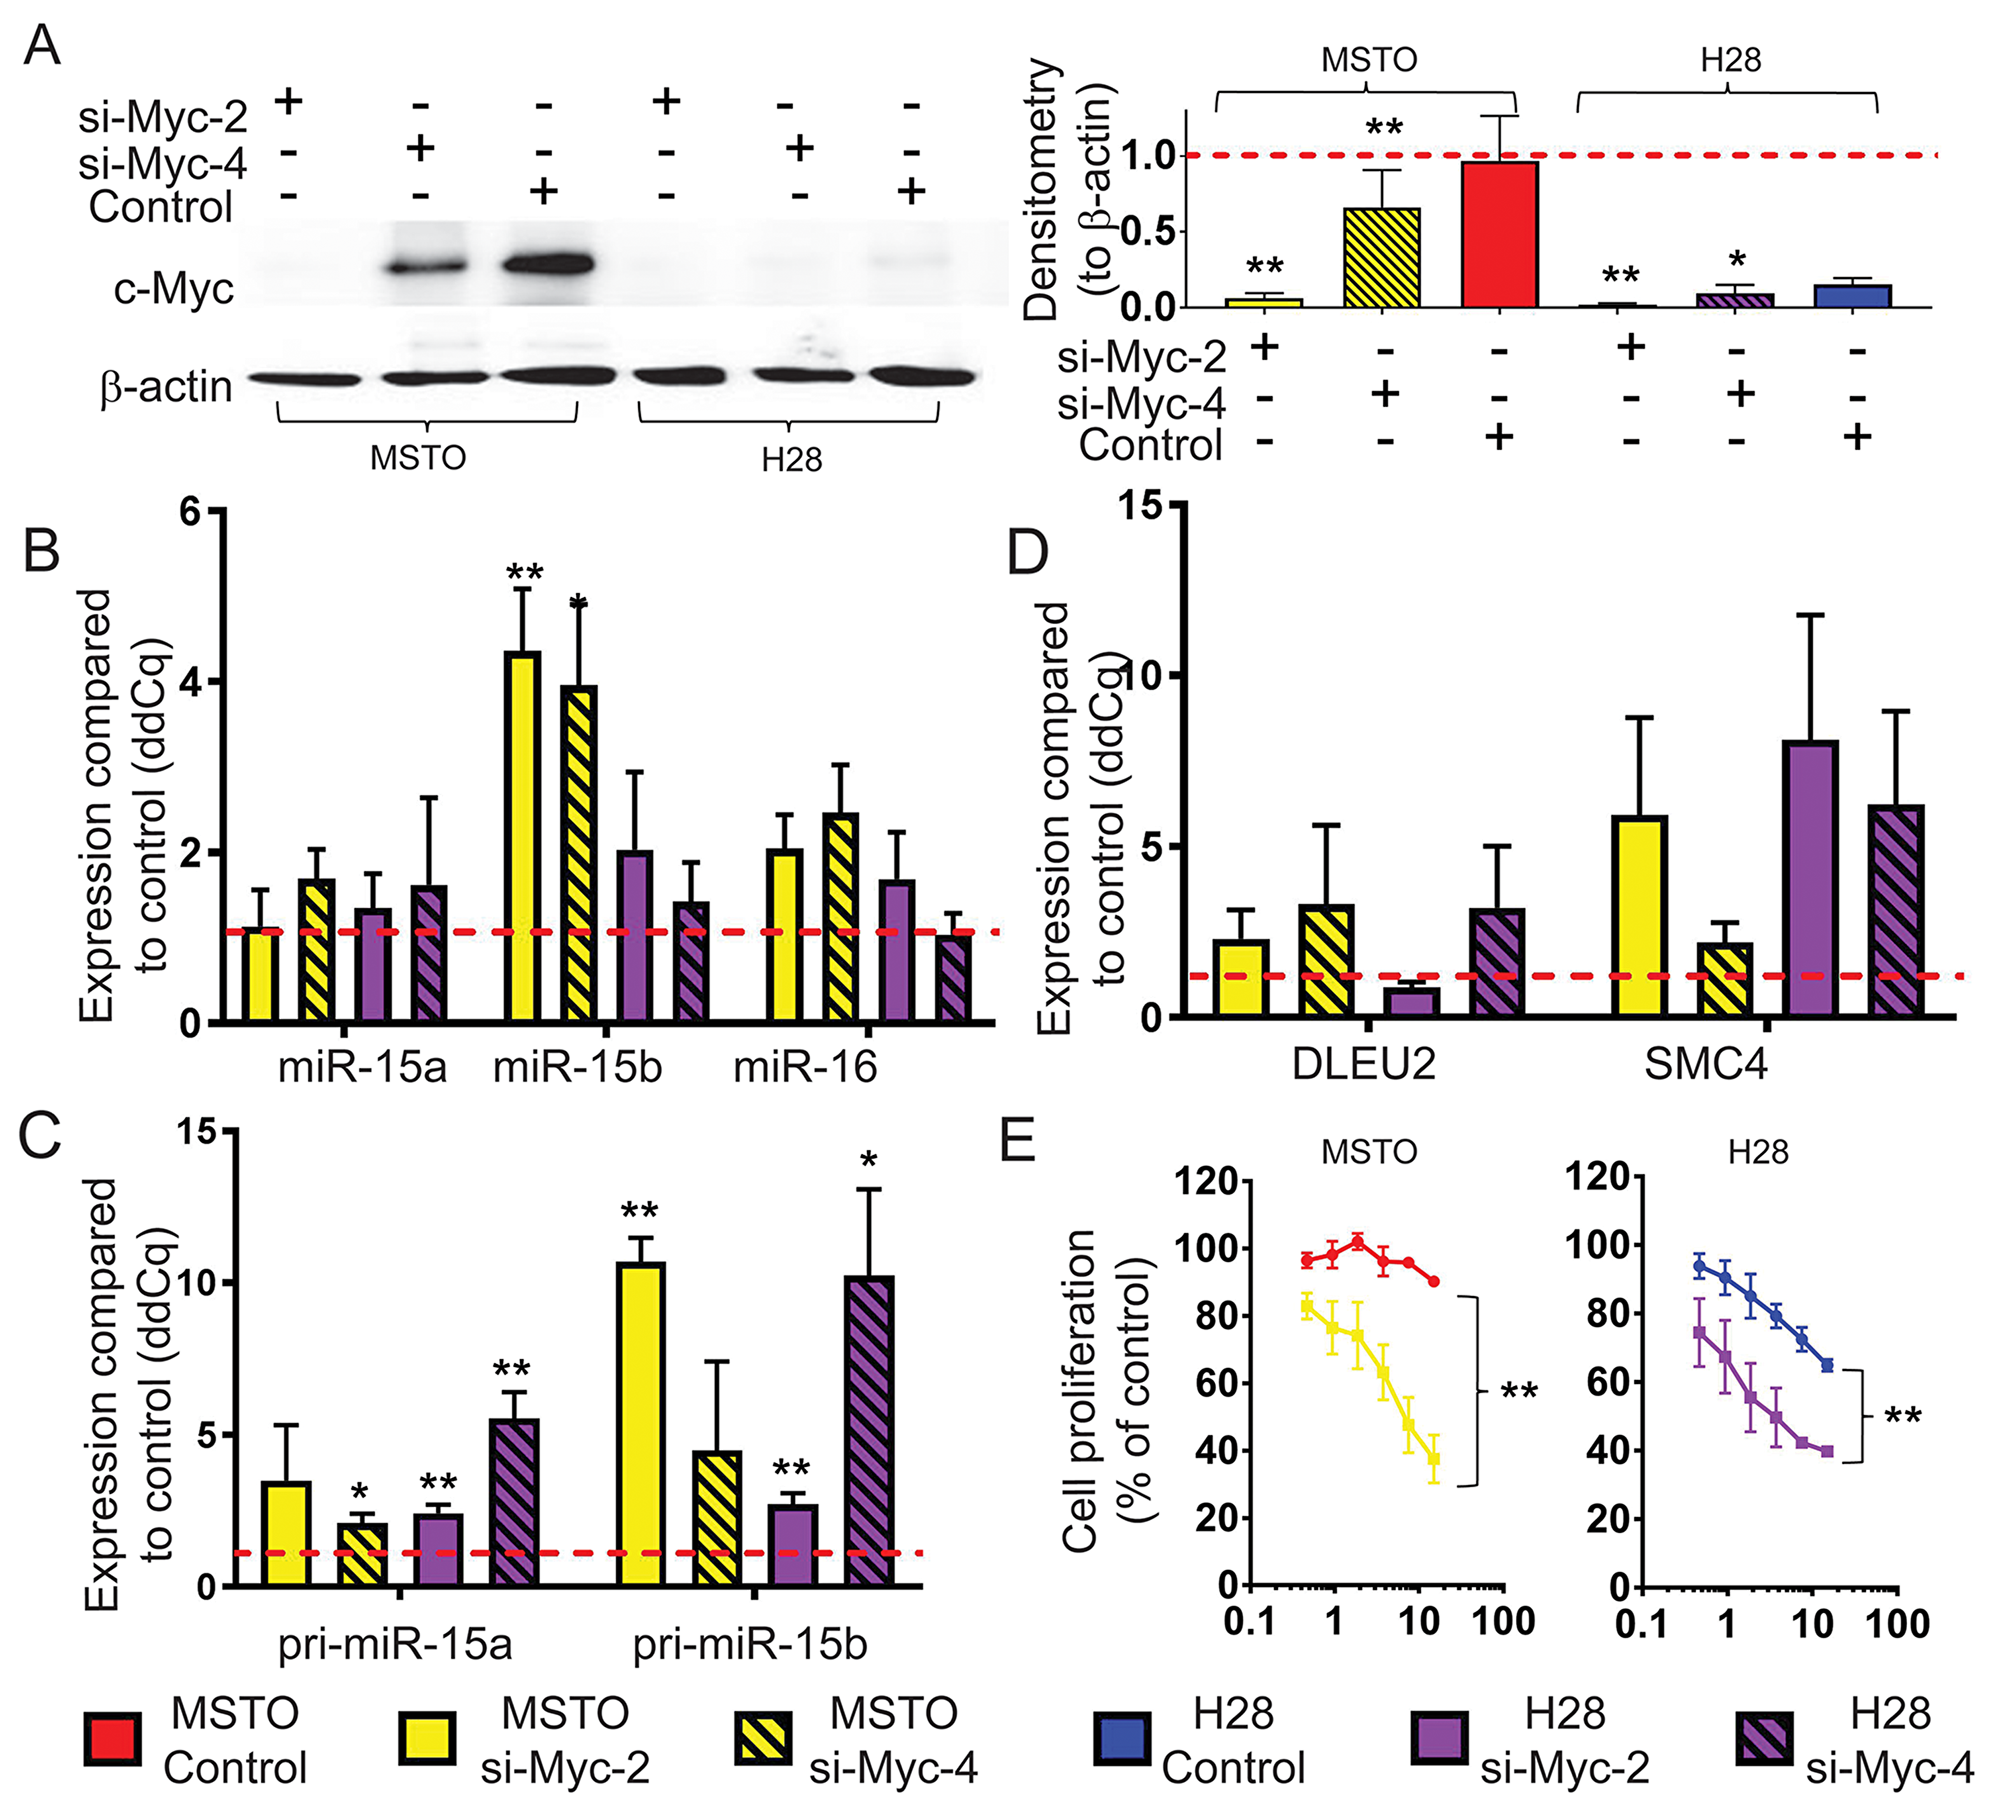 Myc knockdown causes an upregulation of mature miR-15b/16-2 expression and its processing intermediates and inhibits cell growth.